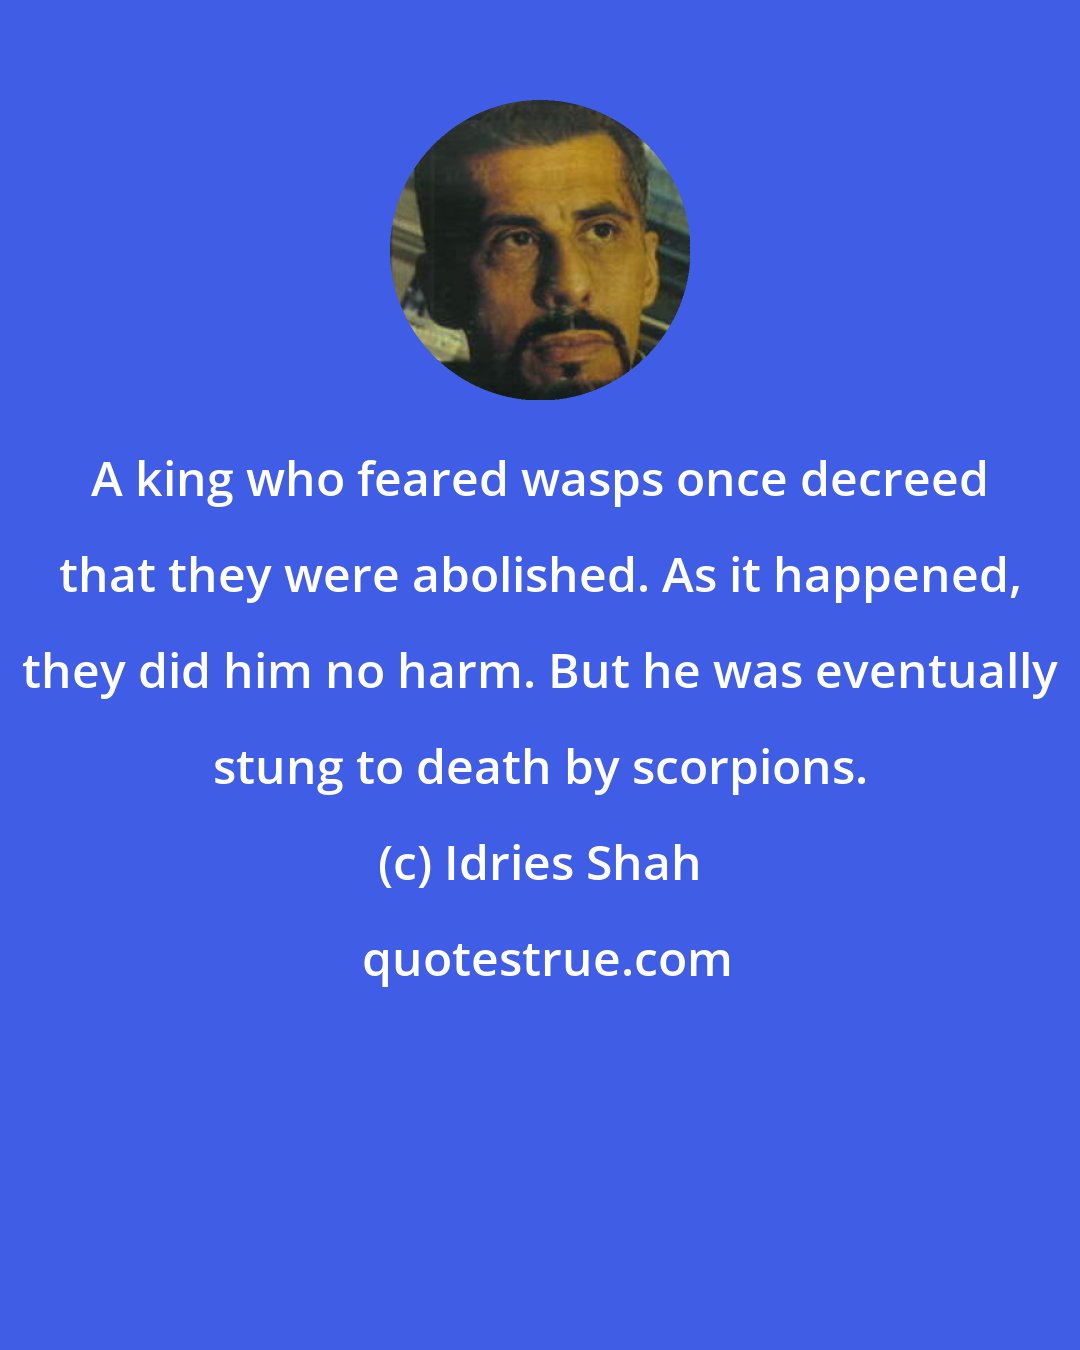 Idries Shah: A king who feared wasps once decreed that they were abolished. As it happened, they did him no harm. But he was eventually stung to death by scorpions.